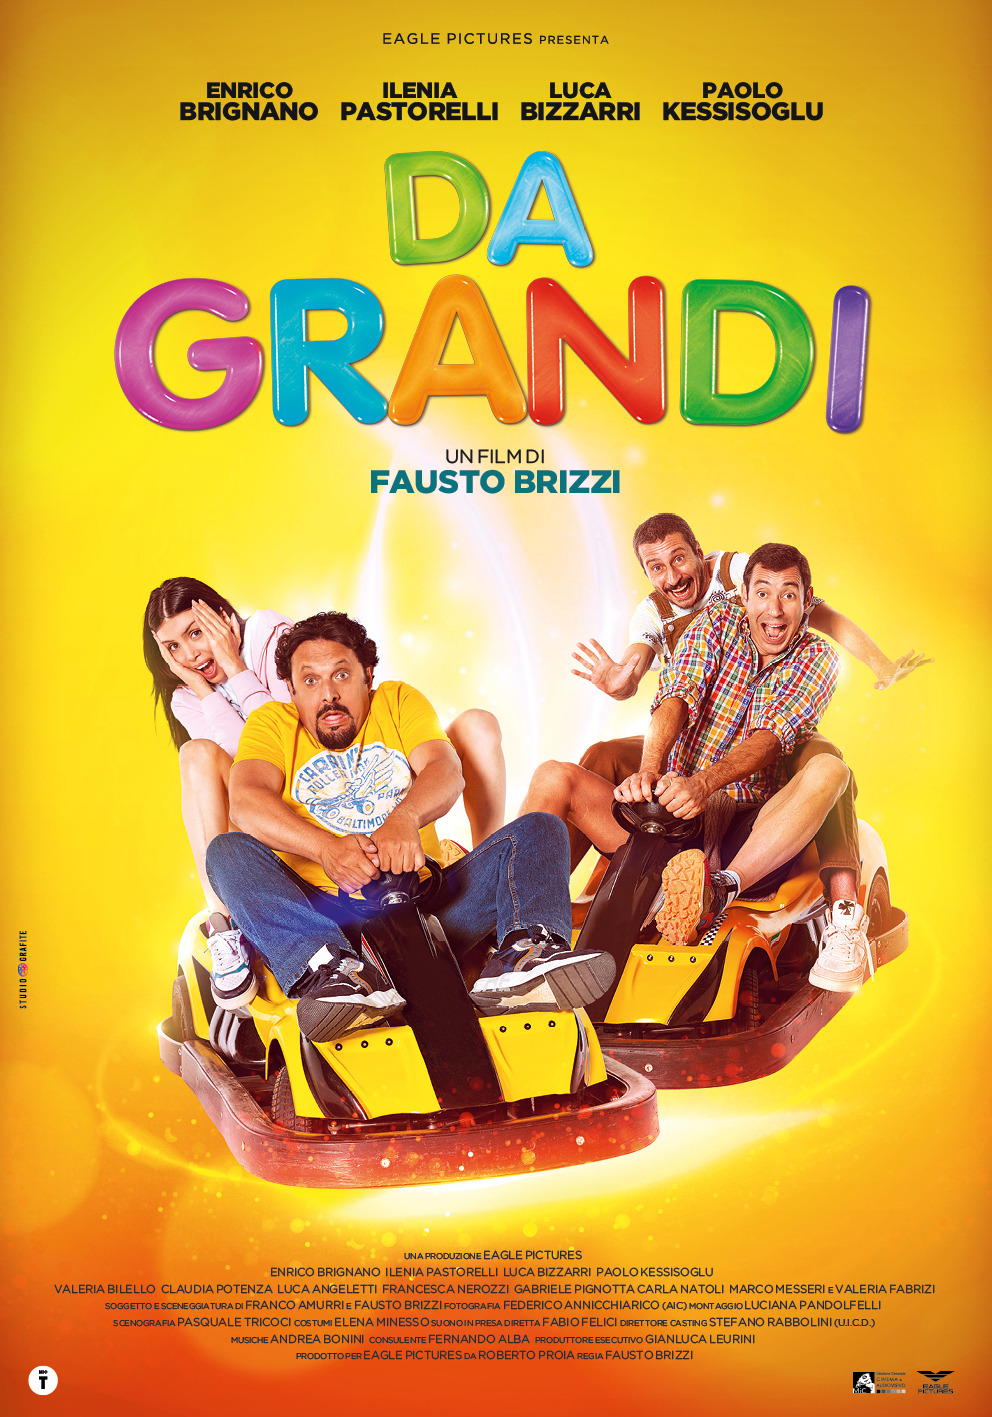 Extra Large Movie Poster Image for Da grandi (#2 of 2)